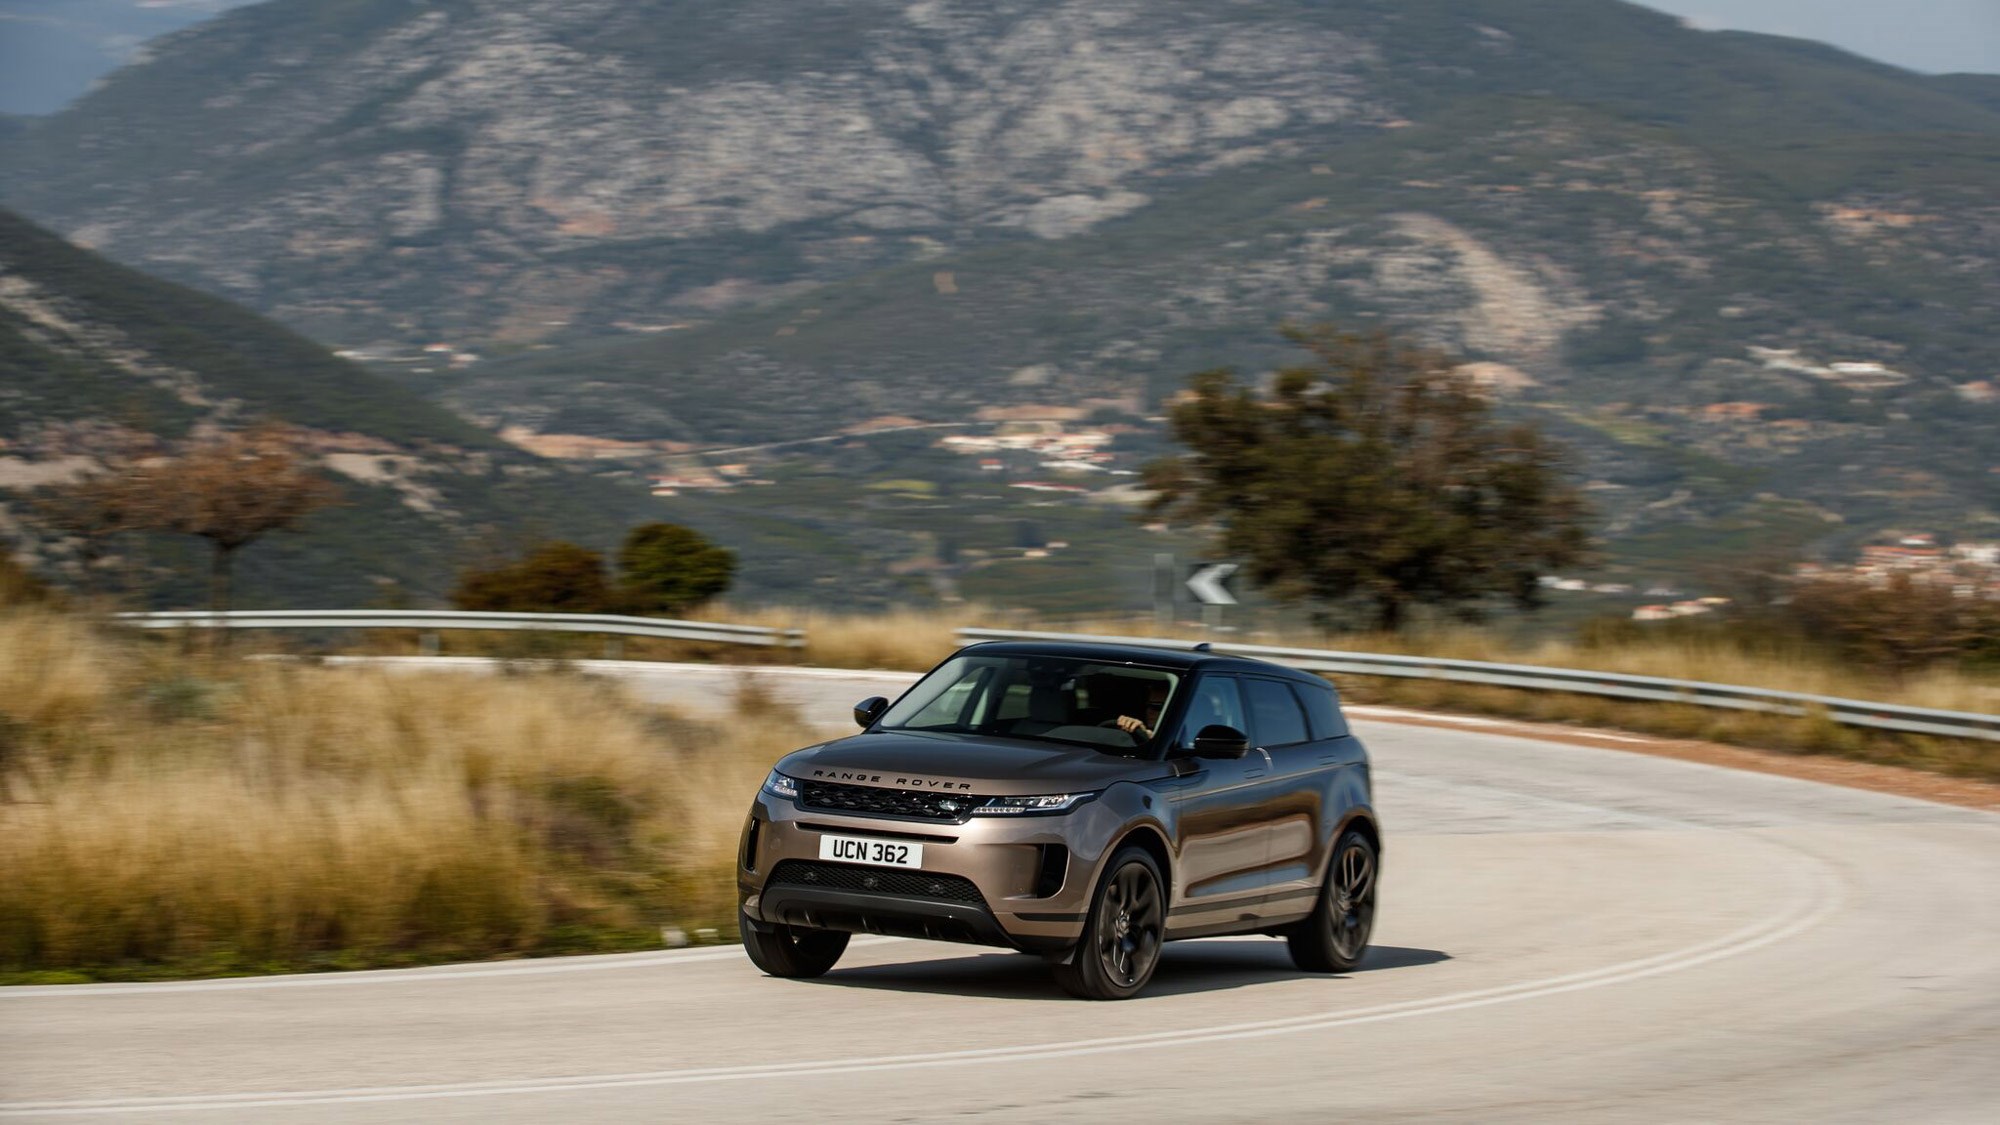 Range Rover Evoque's handling is composed and poised